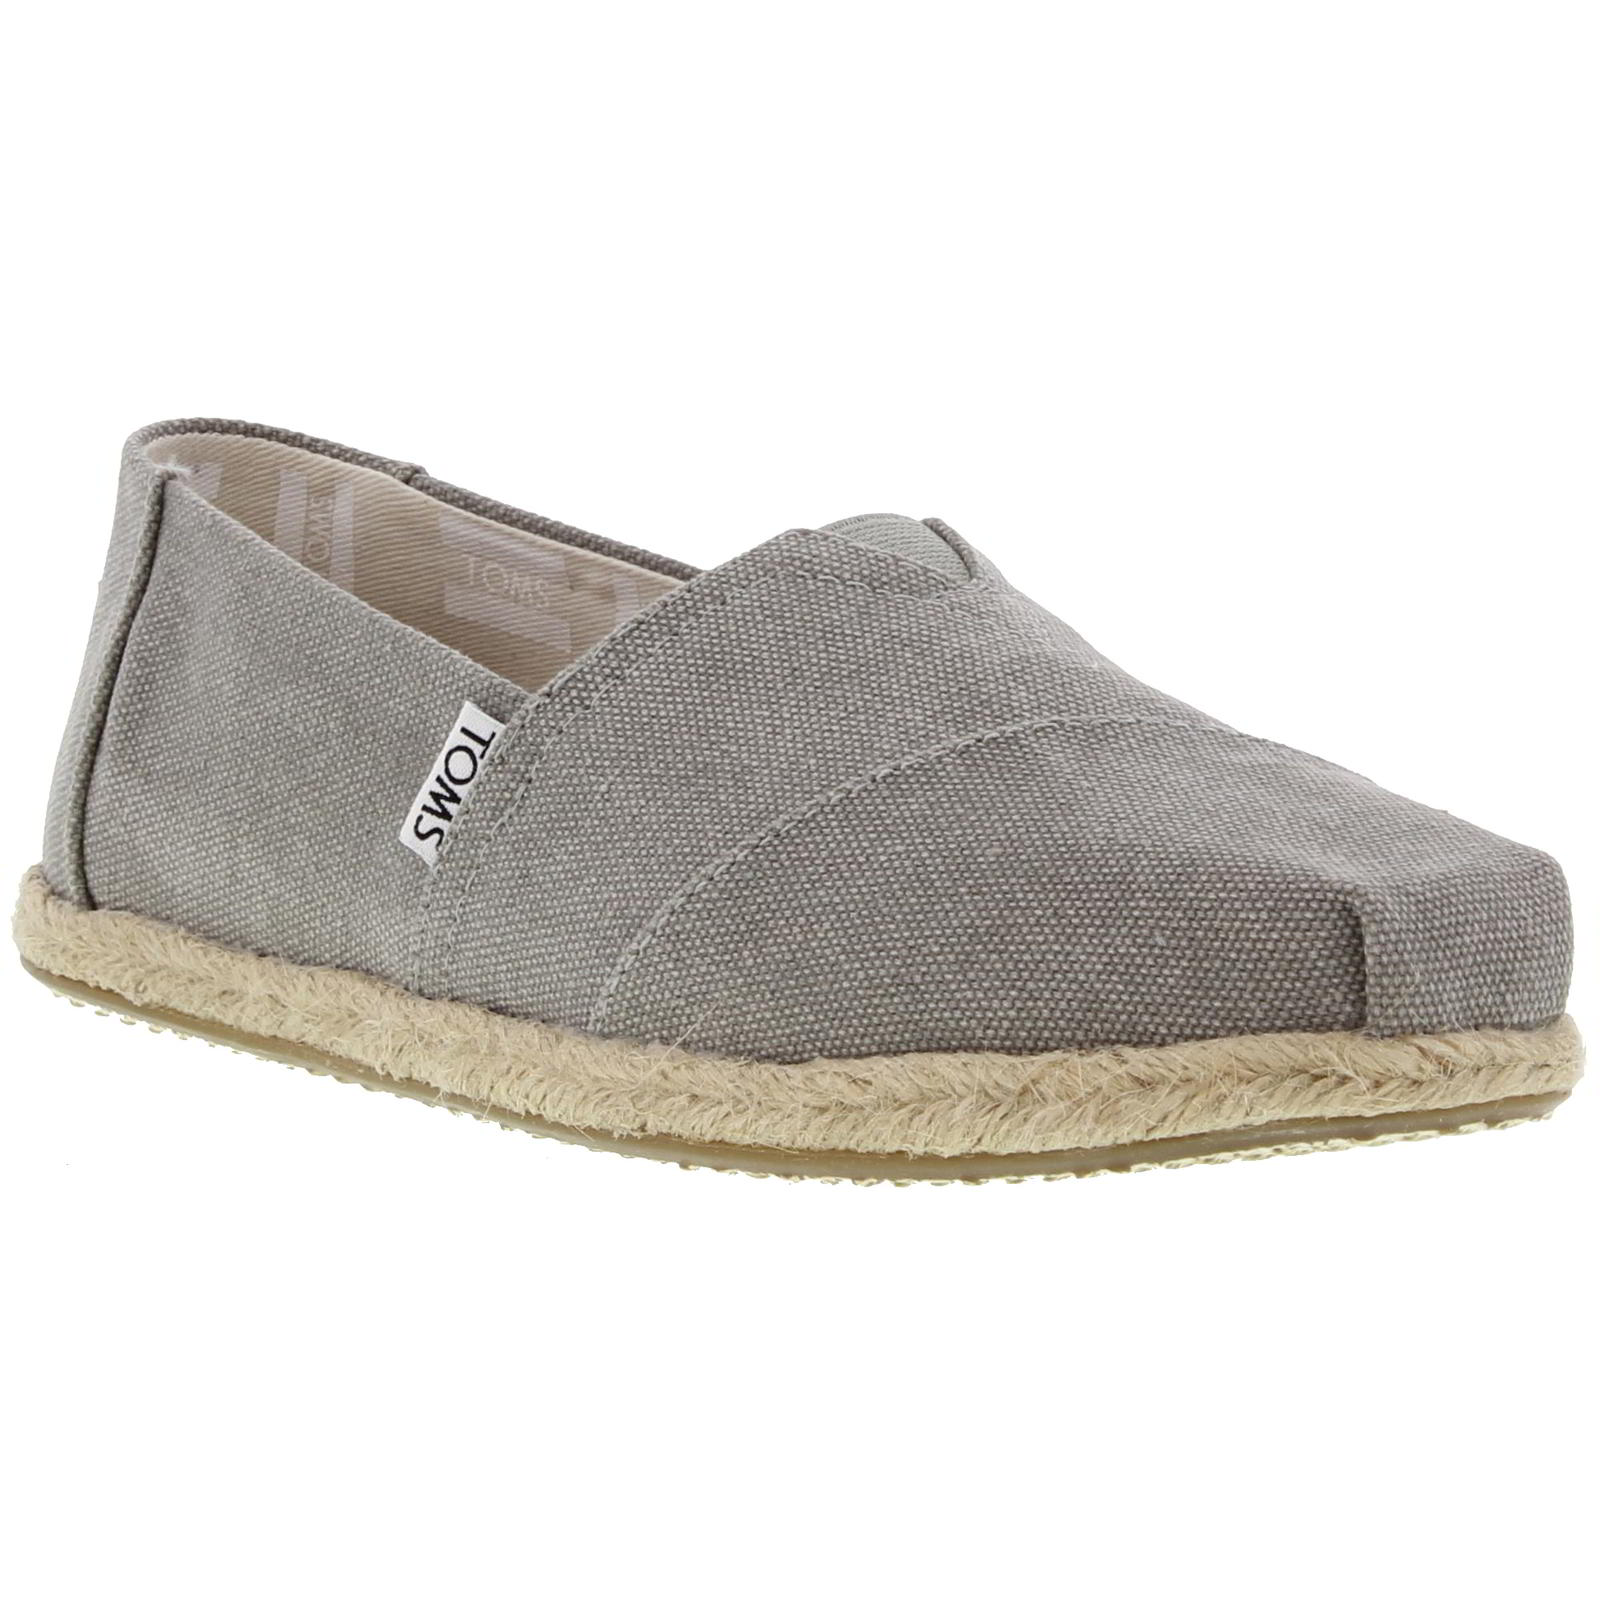 TOMS Toms Womens Classic Espadrille Vegan Shoes - Drizzle Grey Washed 2951